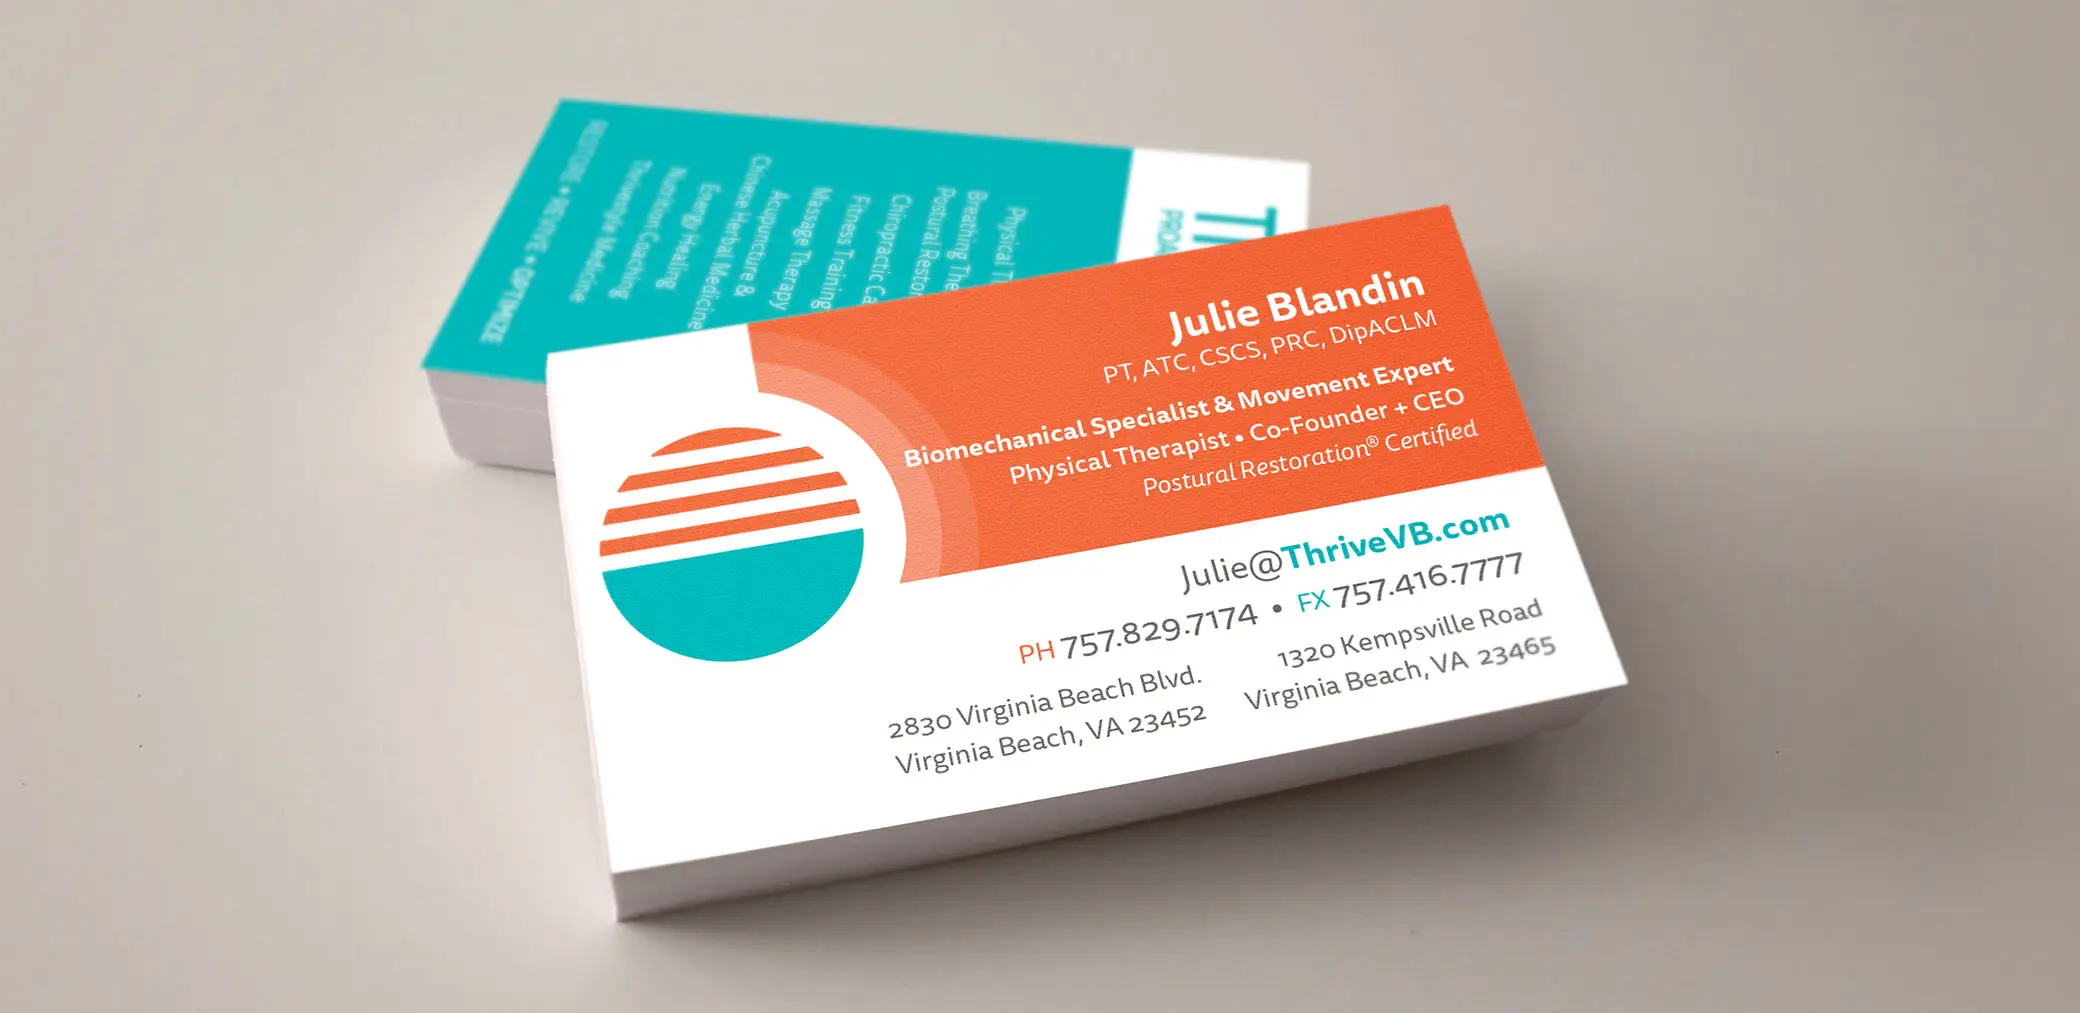 Thrive Proactive Health business card design by Red Chalk Studios